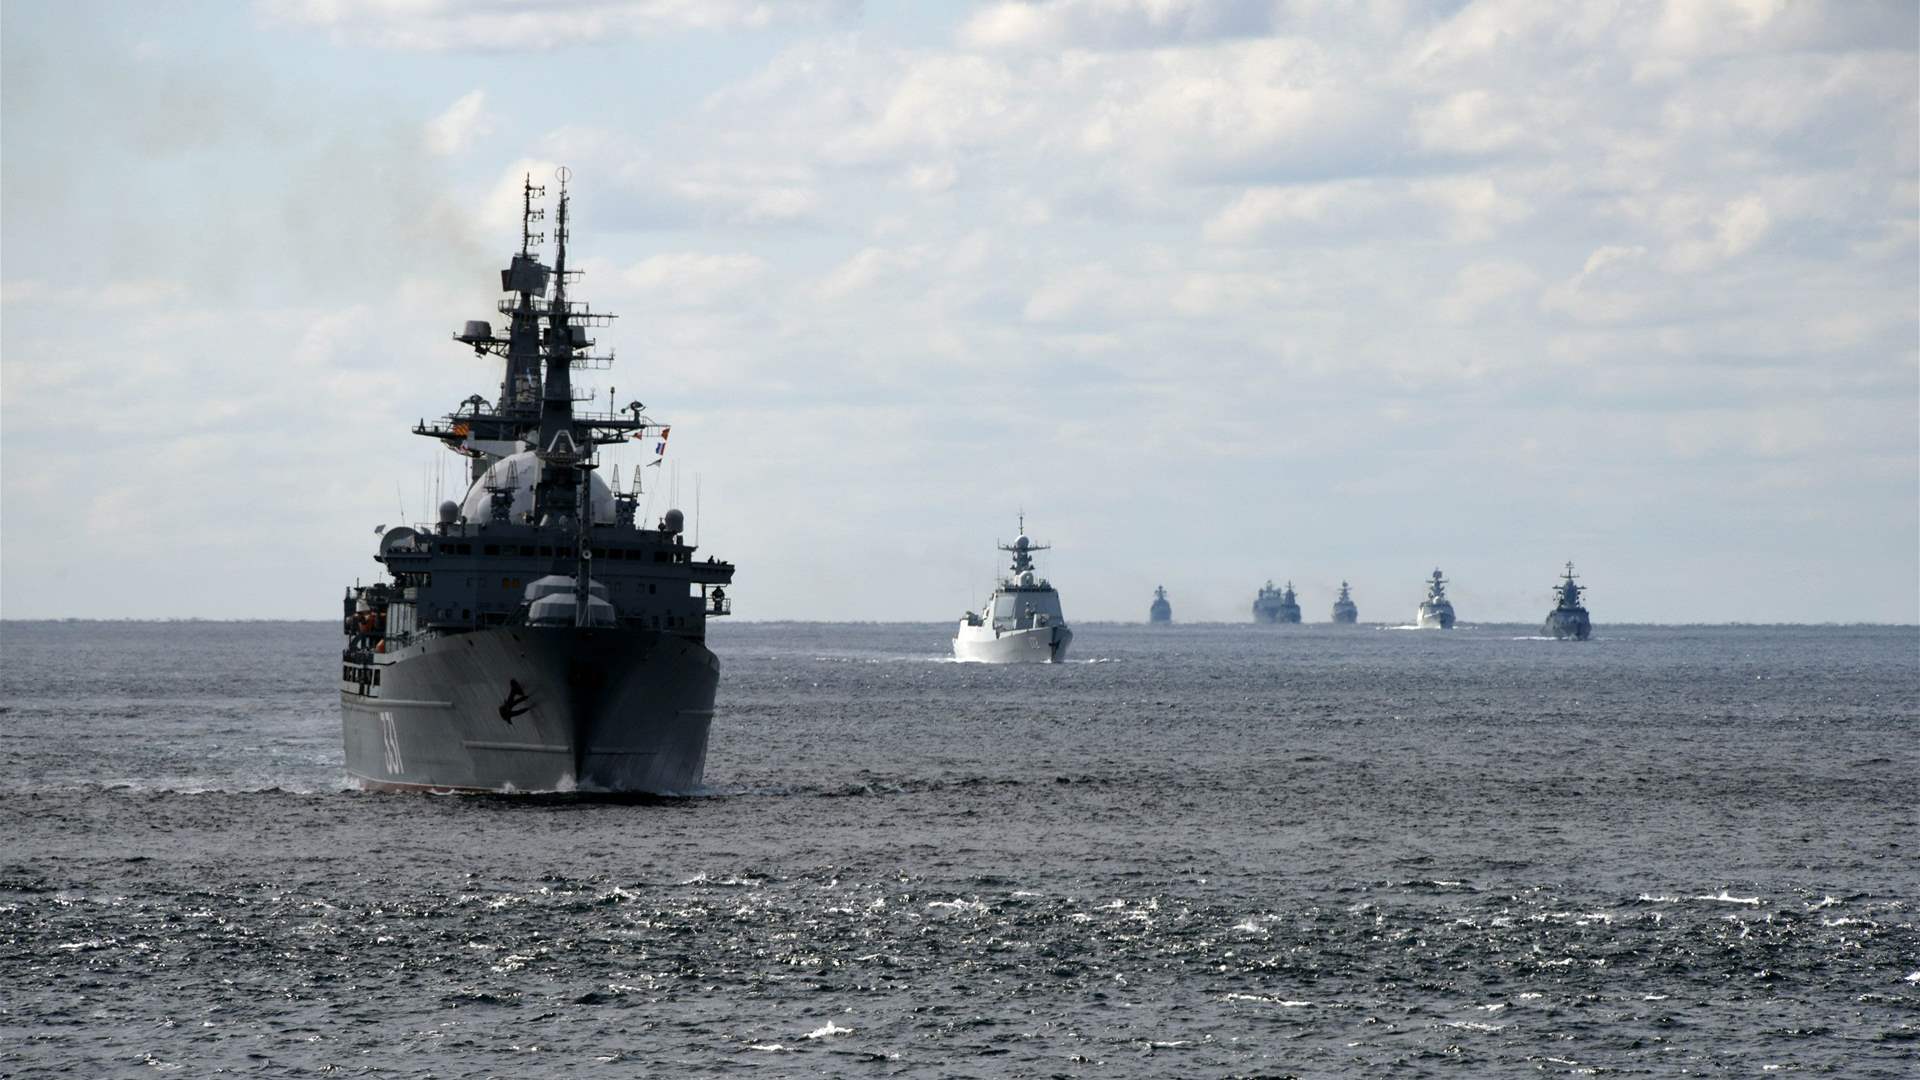 End of Russian-Chinese military exercises in the Sea of Japan